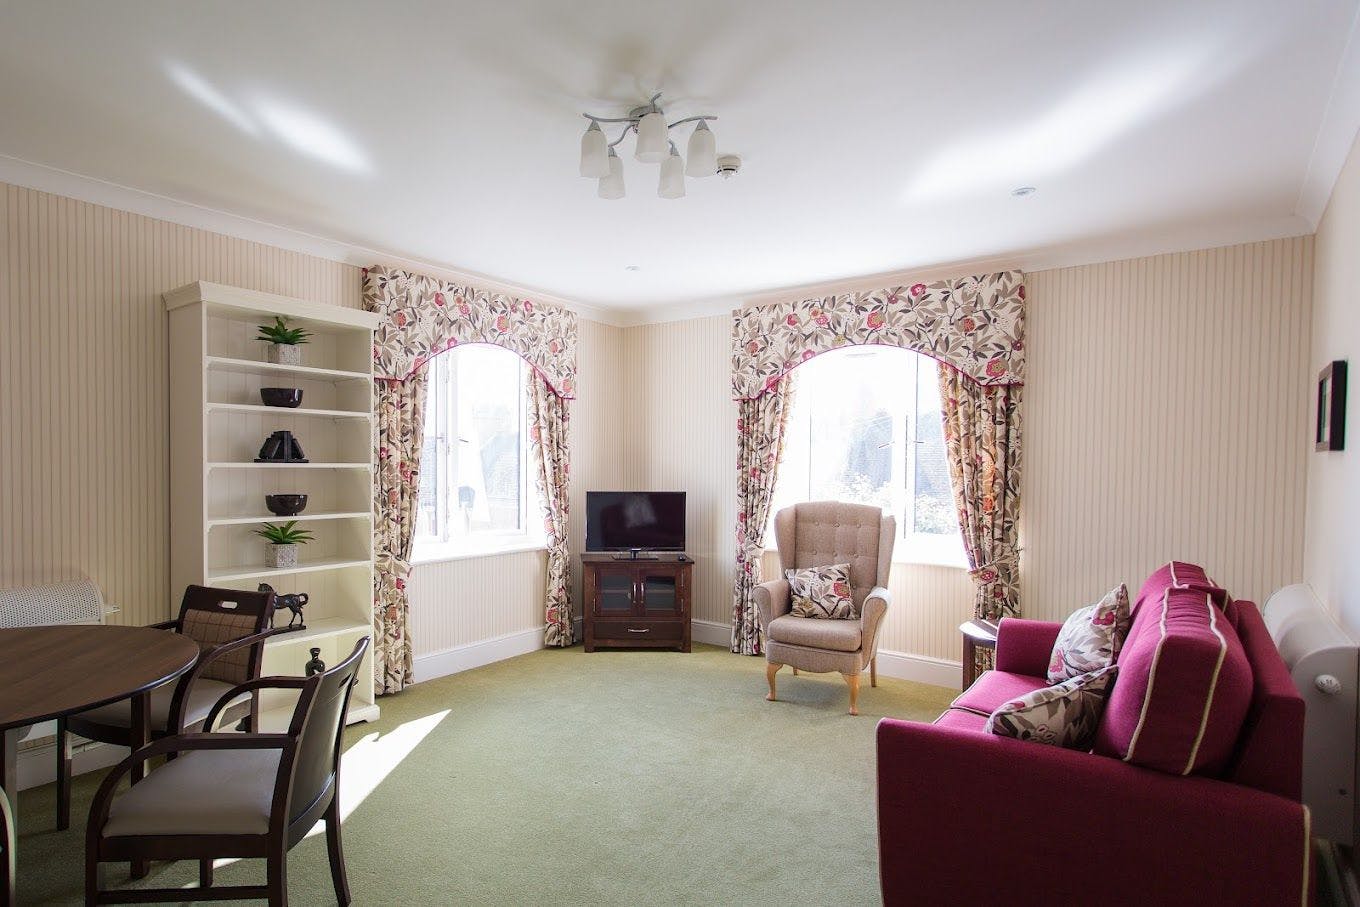 Independent Care Home - The Ashton care home 7